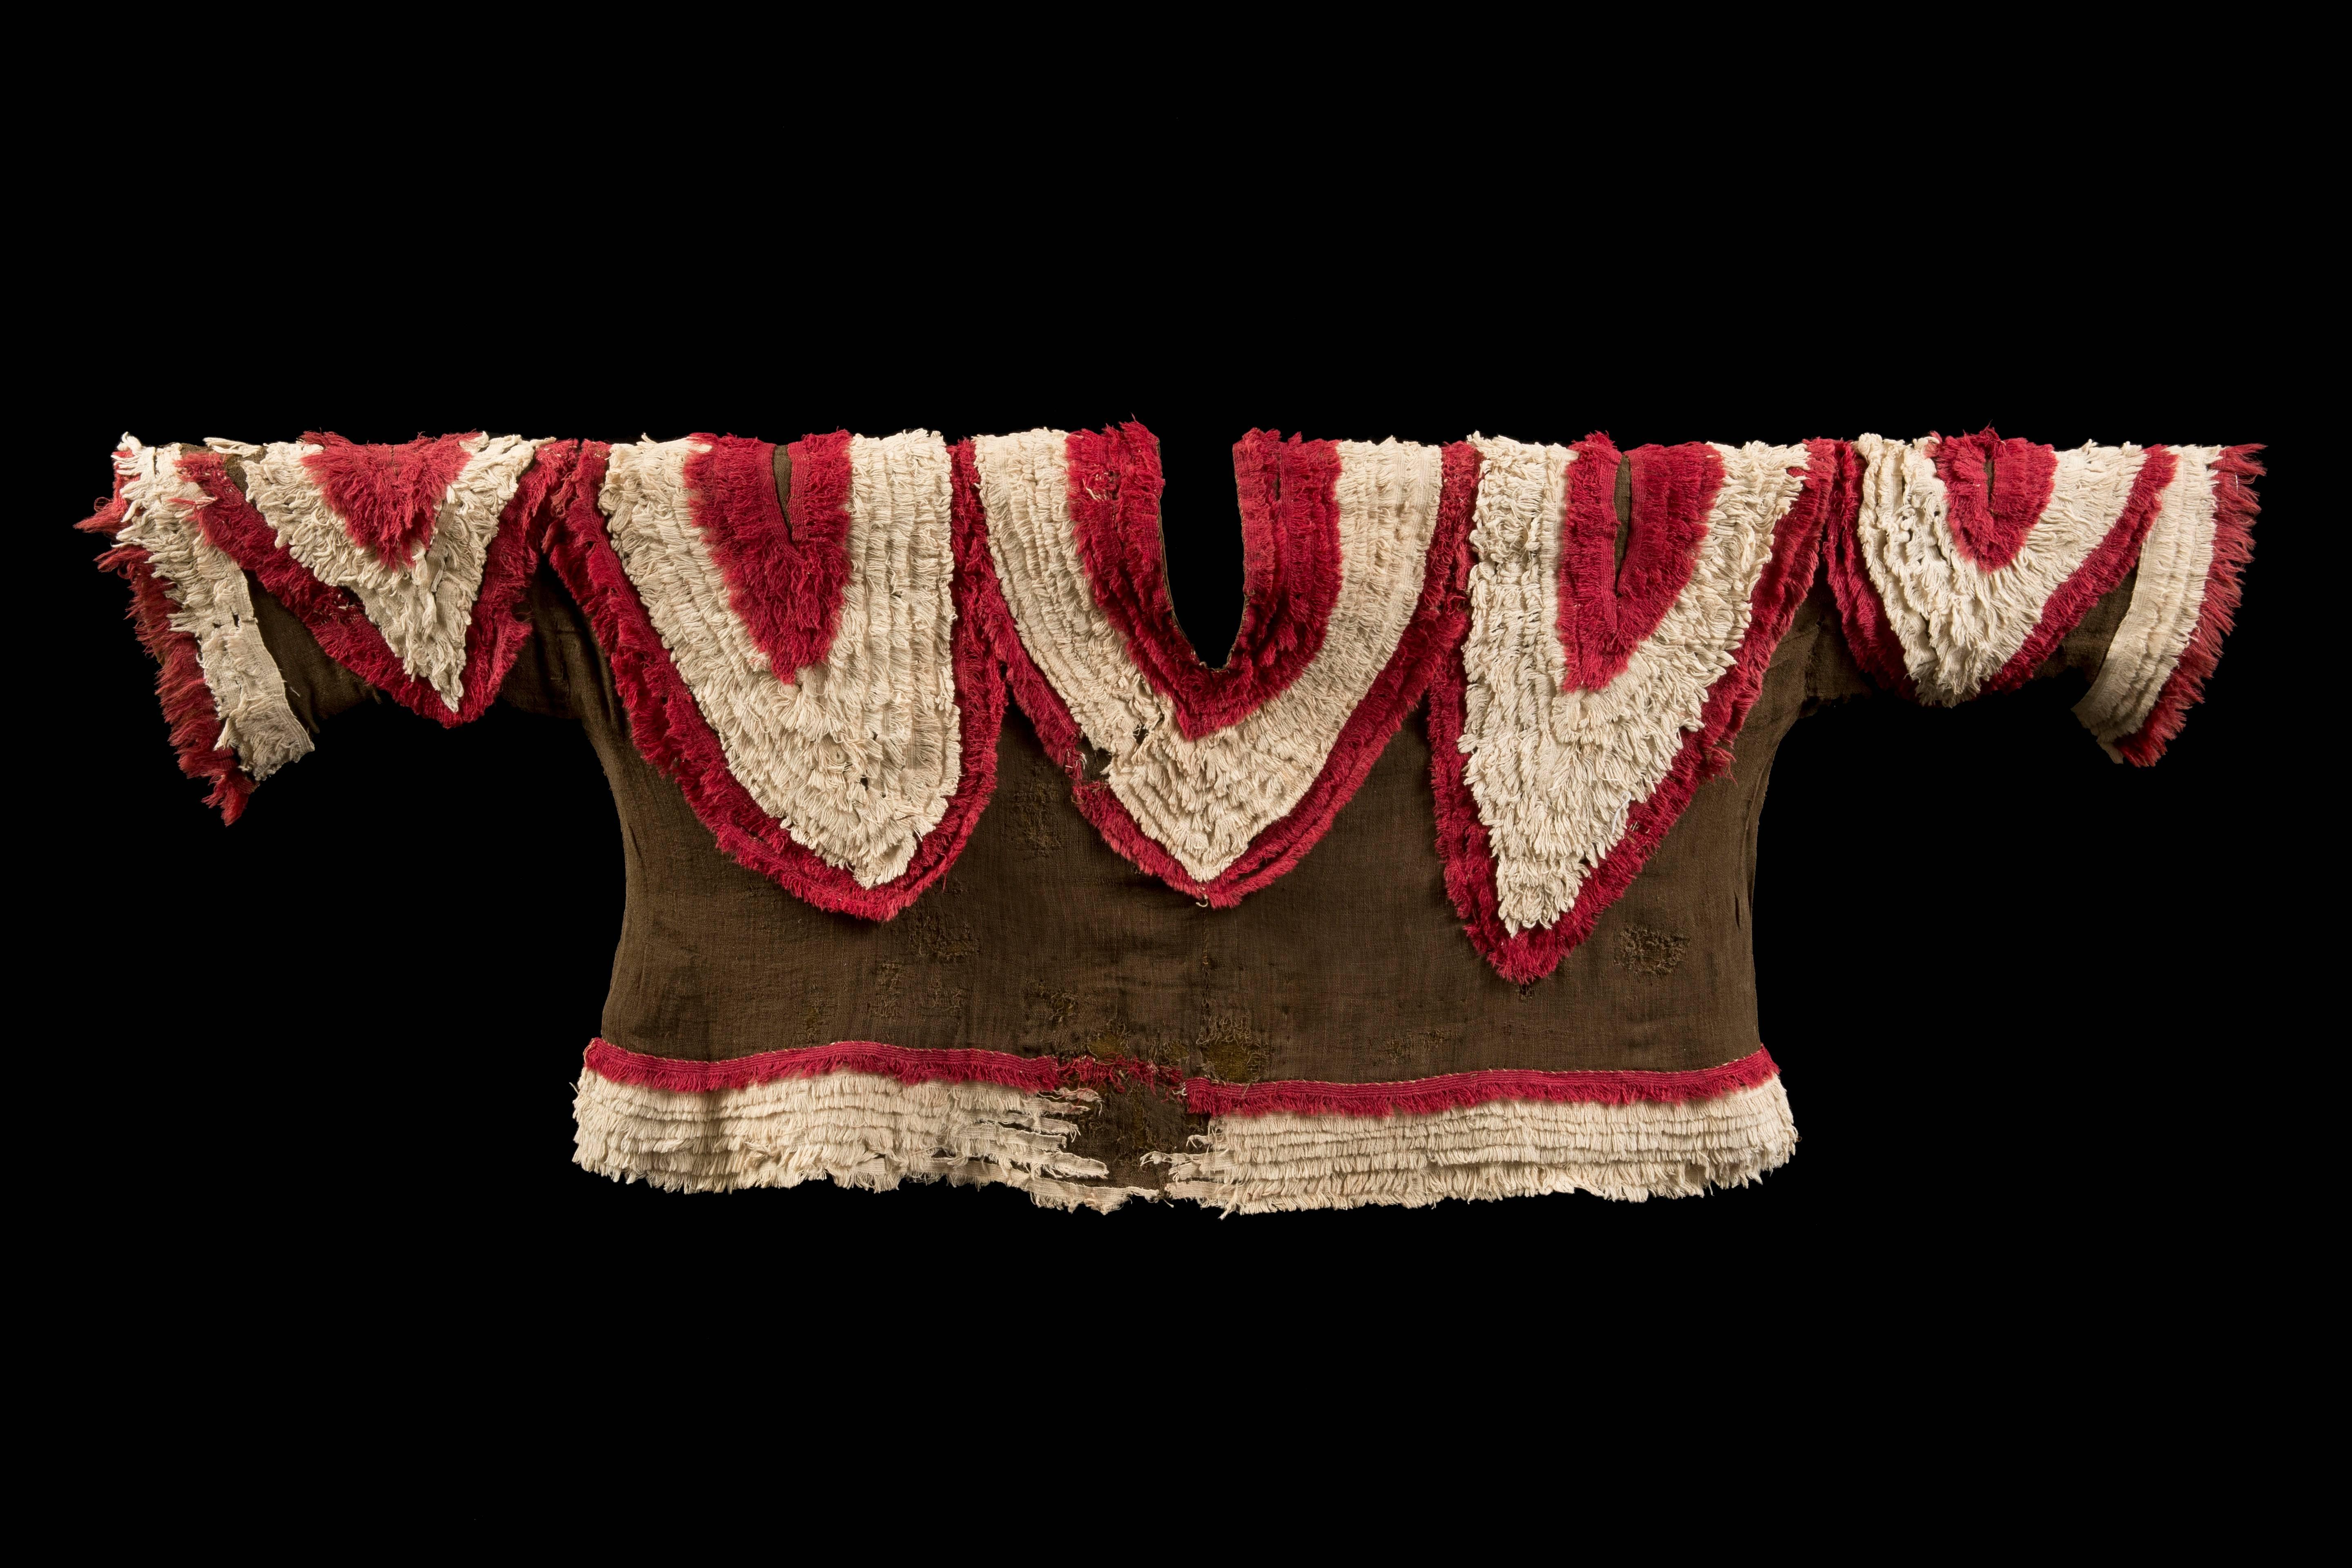 Chimu brown gauze shirt with multiple red and white fringe lines forming V designs like the one around the neck, with very rarely seen sleeves and border fringe in the same material.